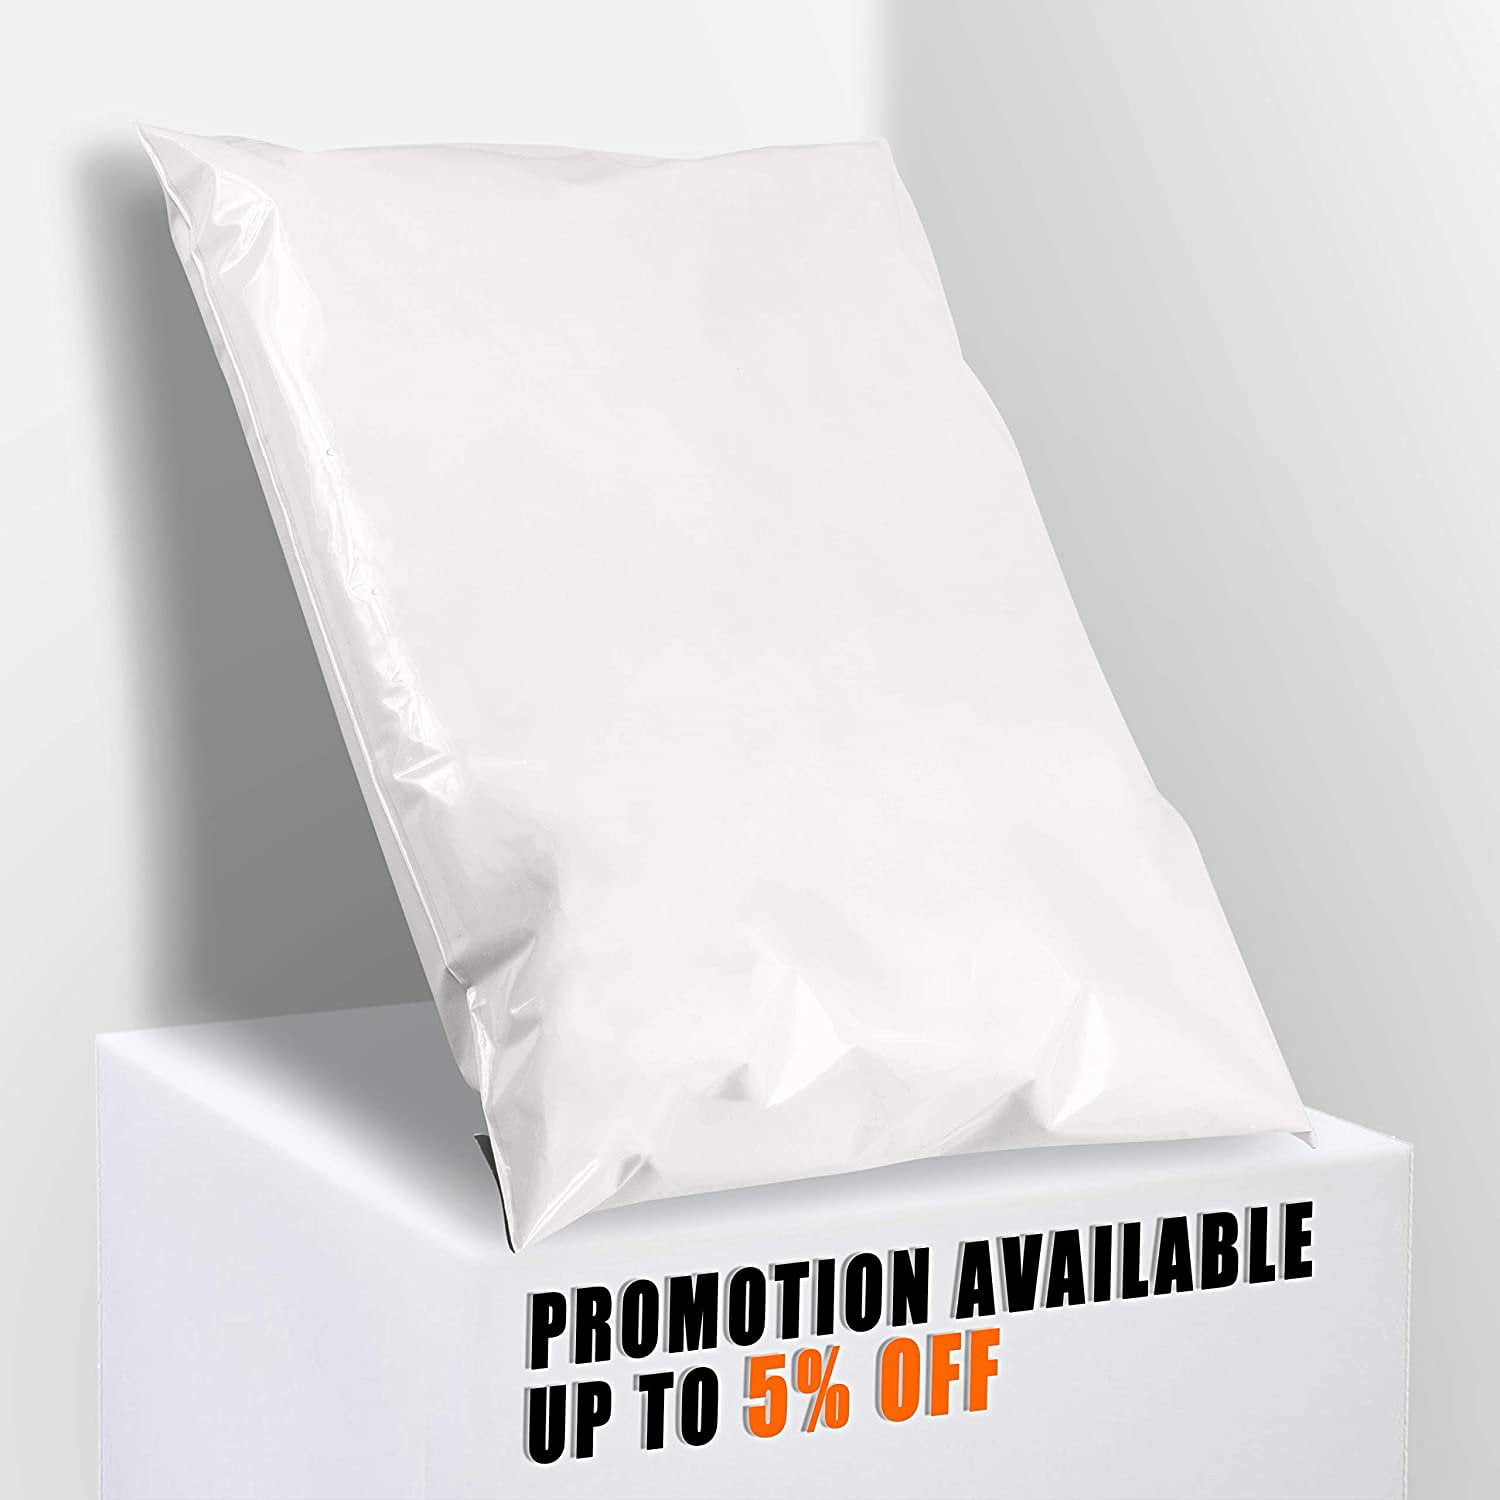 Peel & Seal 2.4 mil thick mailing bags Packing Pack of 50 White Large envelopes Wrapping Amiff Gusseted Poly mailers 20x24x4 Shipping bags 20 x 24 x 4 Lightweight Packaging. Waterproof